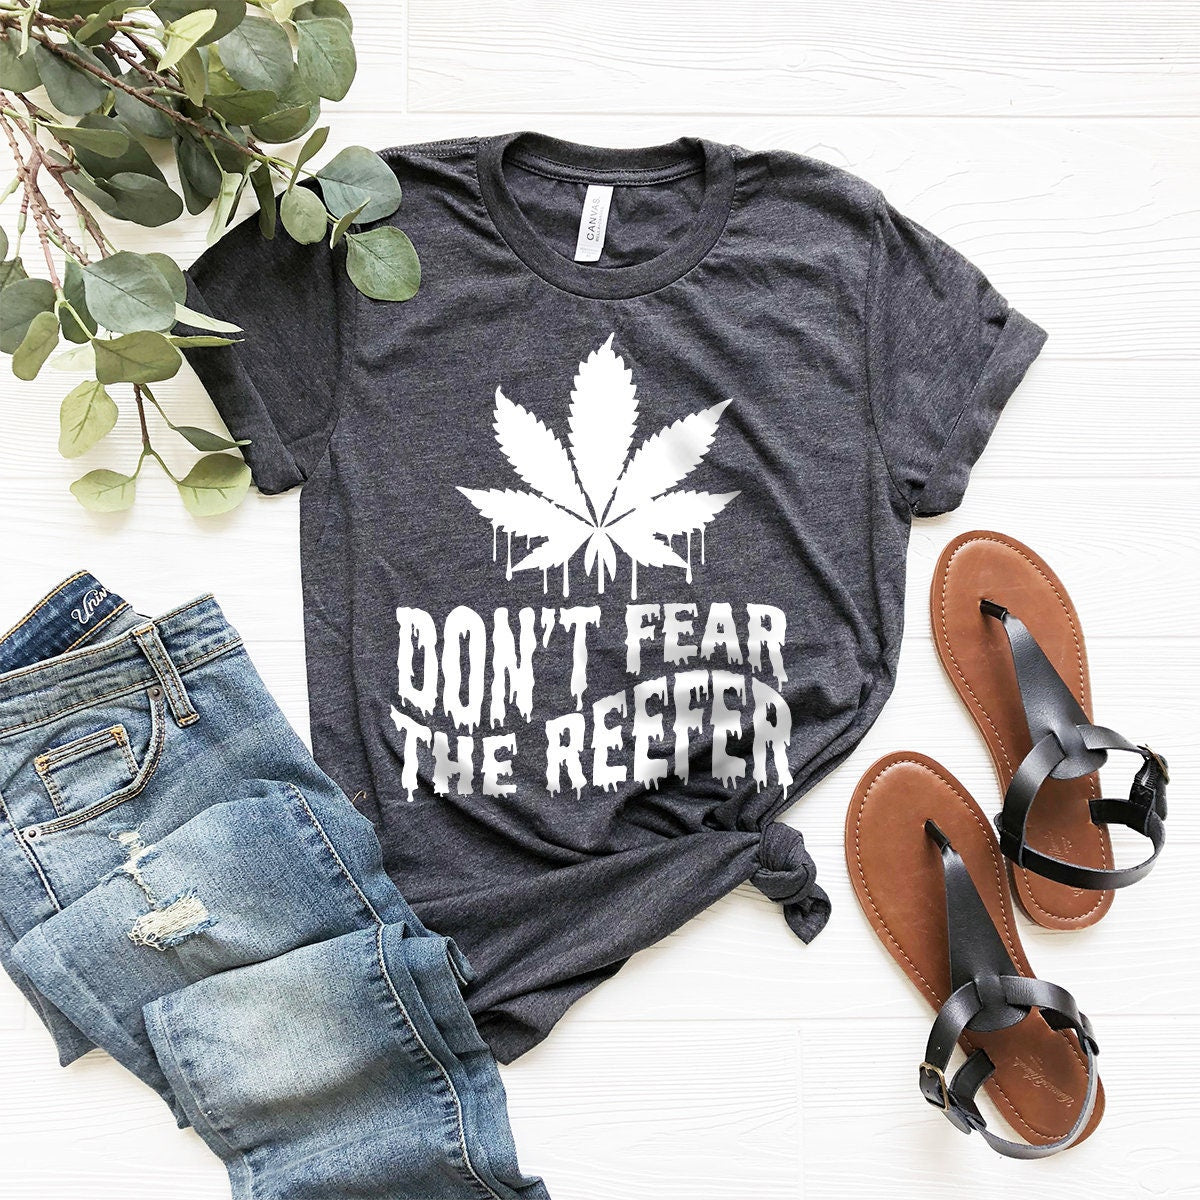 Weed T-Shirt, Cannabis Shirt, Don't Fear The Reefer Shirt, Marijuana Shirt, Funny Weed Shirt, Weed Gift, Weed Tee, 420-Weed Shirt - Fastdeliverytees.com